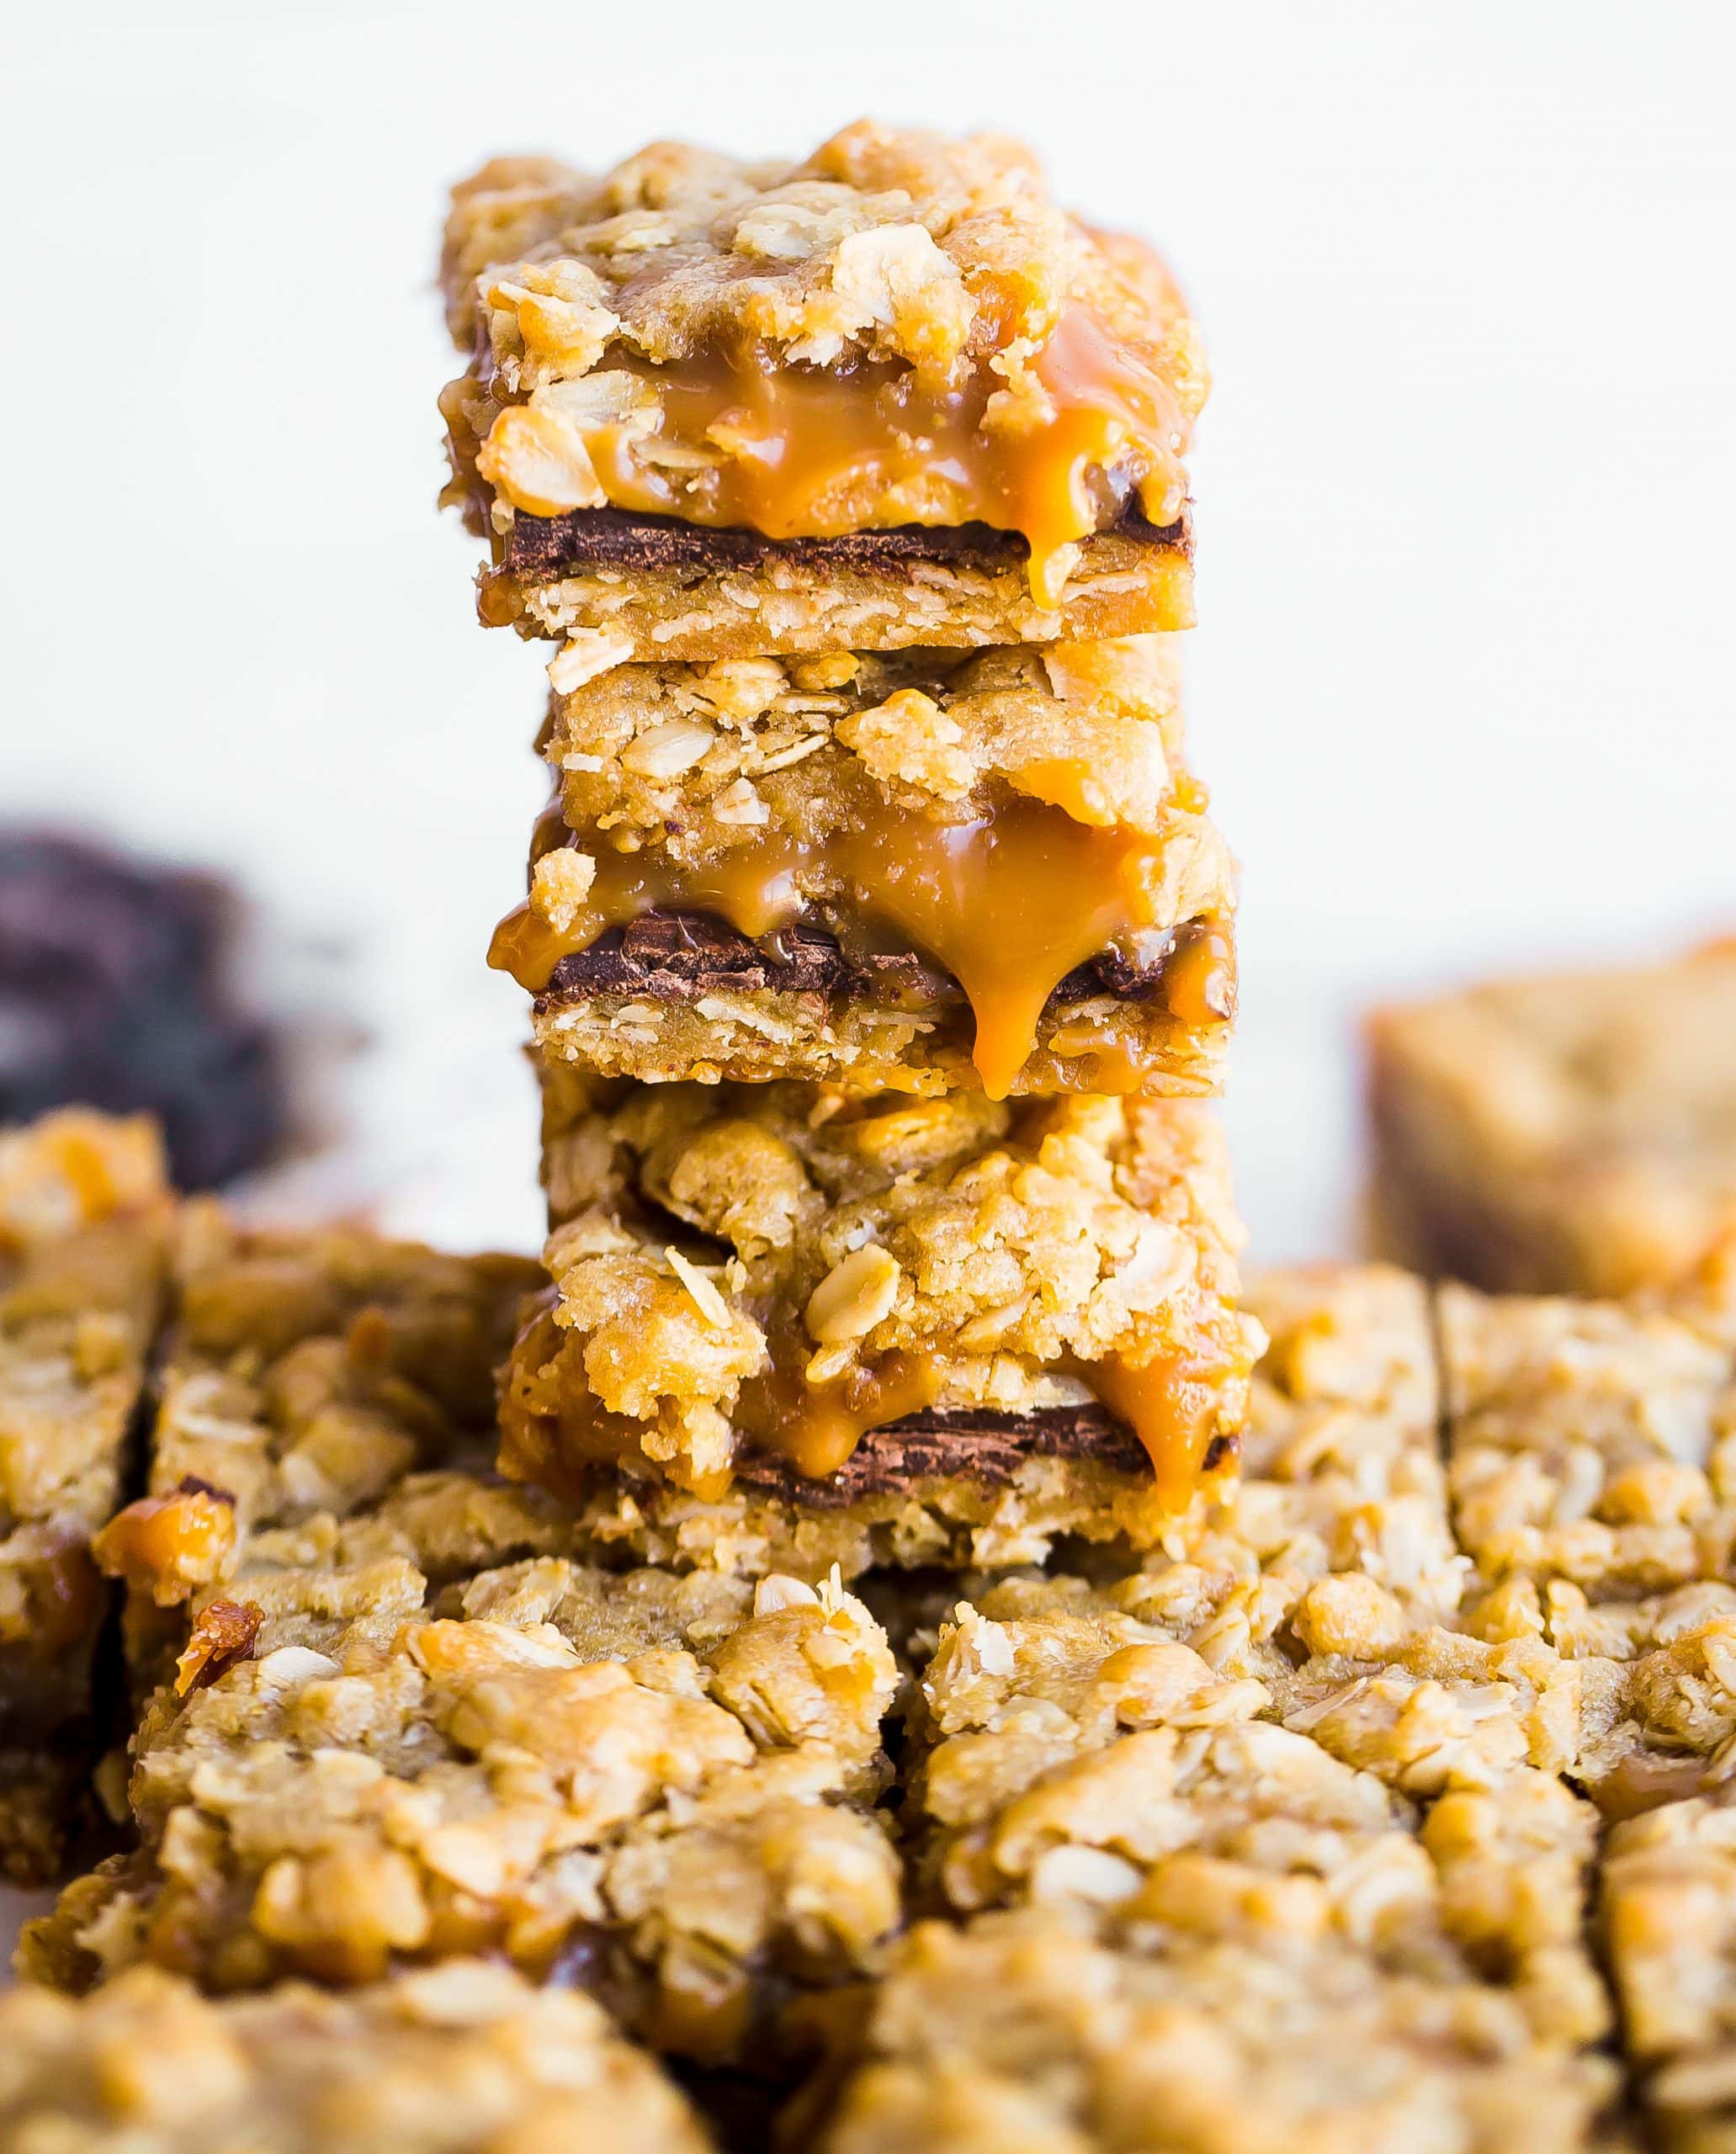 Stack of Oatmeal Caramel Chocolate Bars with gooey caramel coming out of the centers.